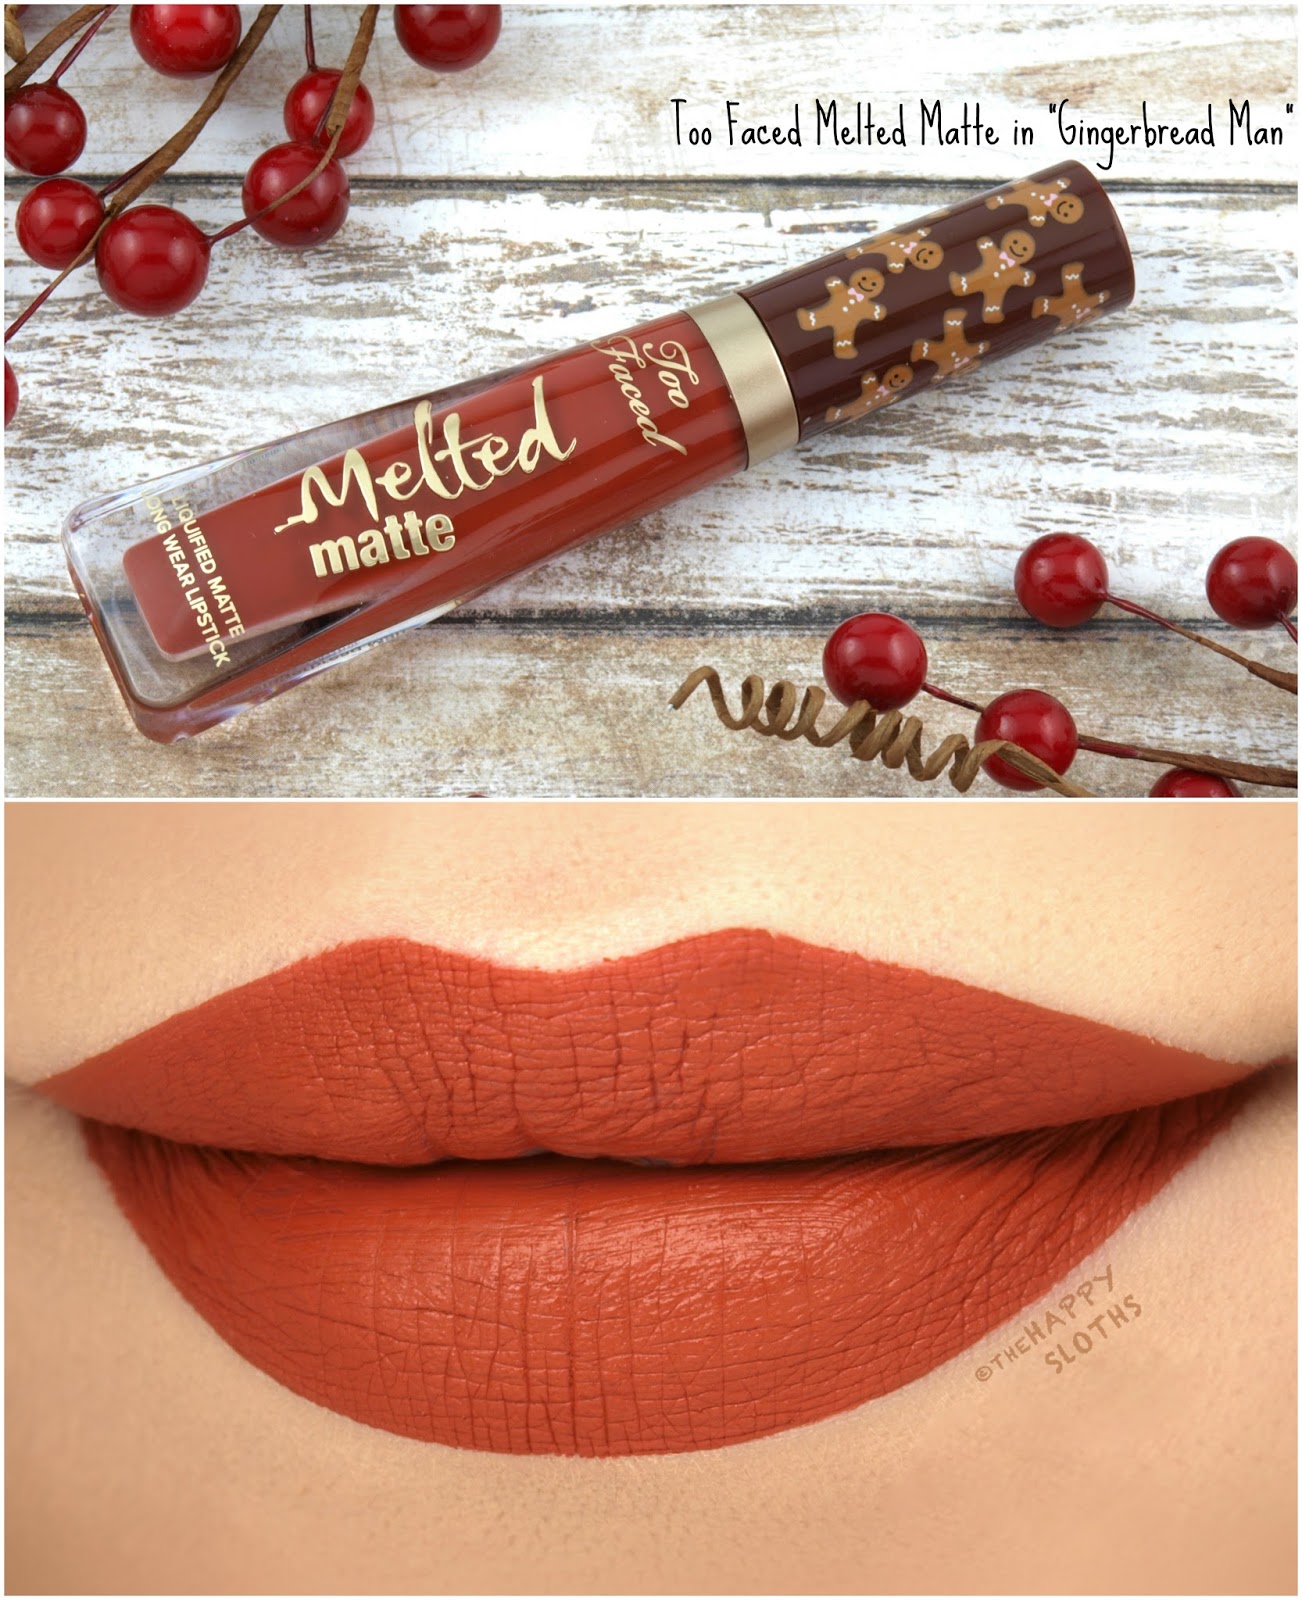 Too Faced Holiday 2017 | Melted Matte Liquified Lipstick in "Gingerbread Man": Review and Swatches